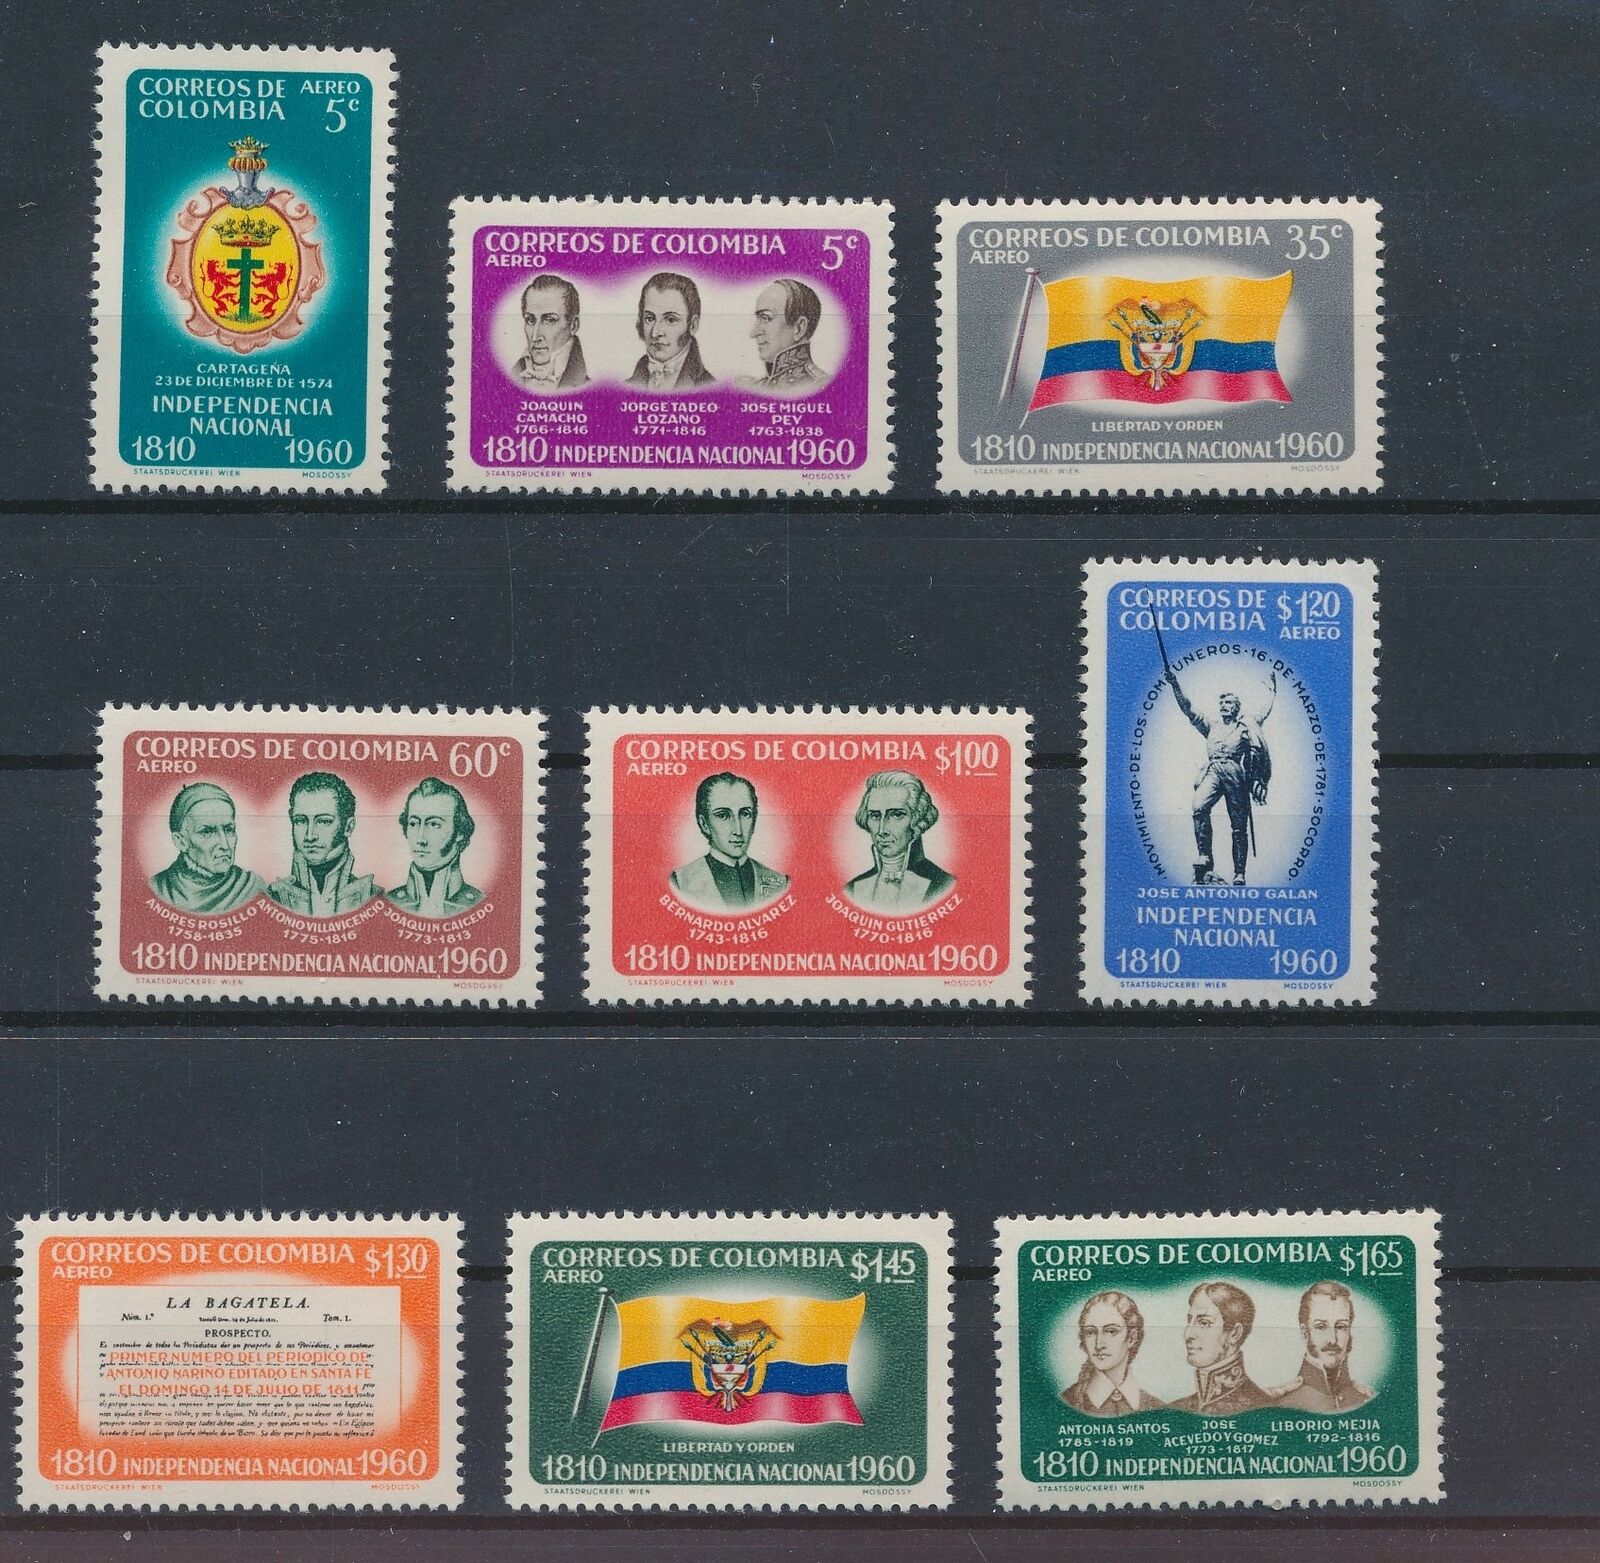 LP43727 Colombia independence historical figures fine lot MNH